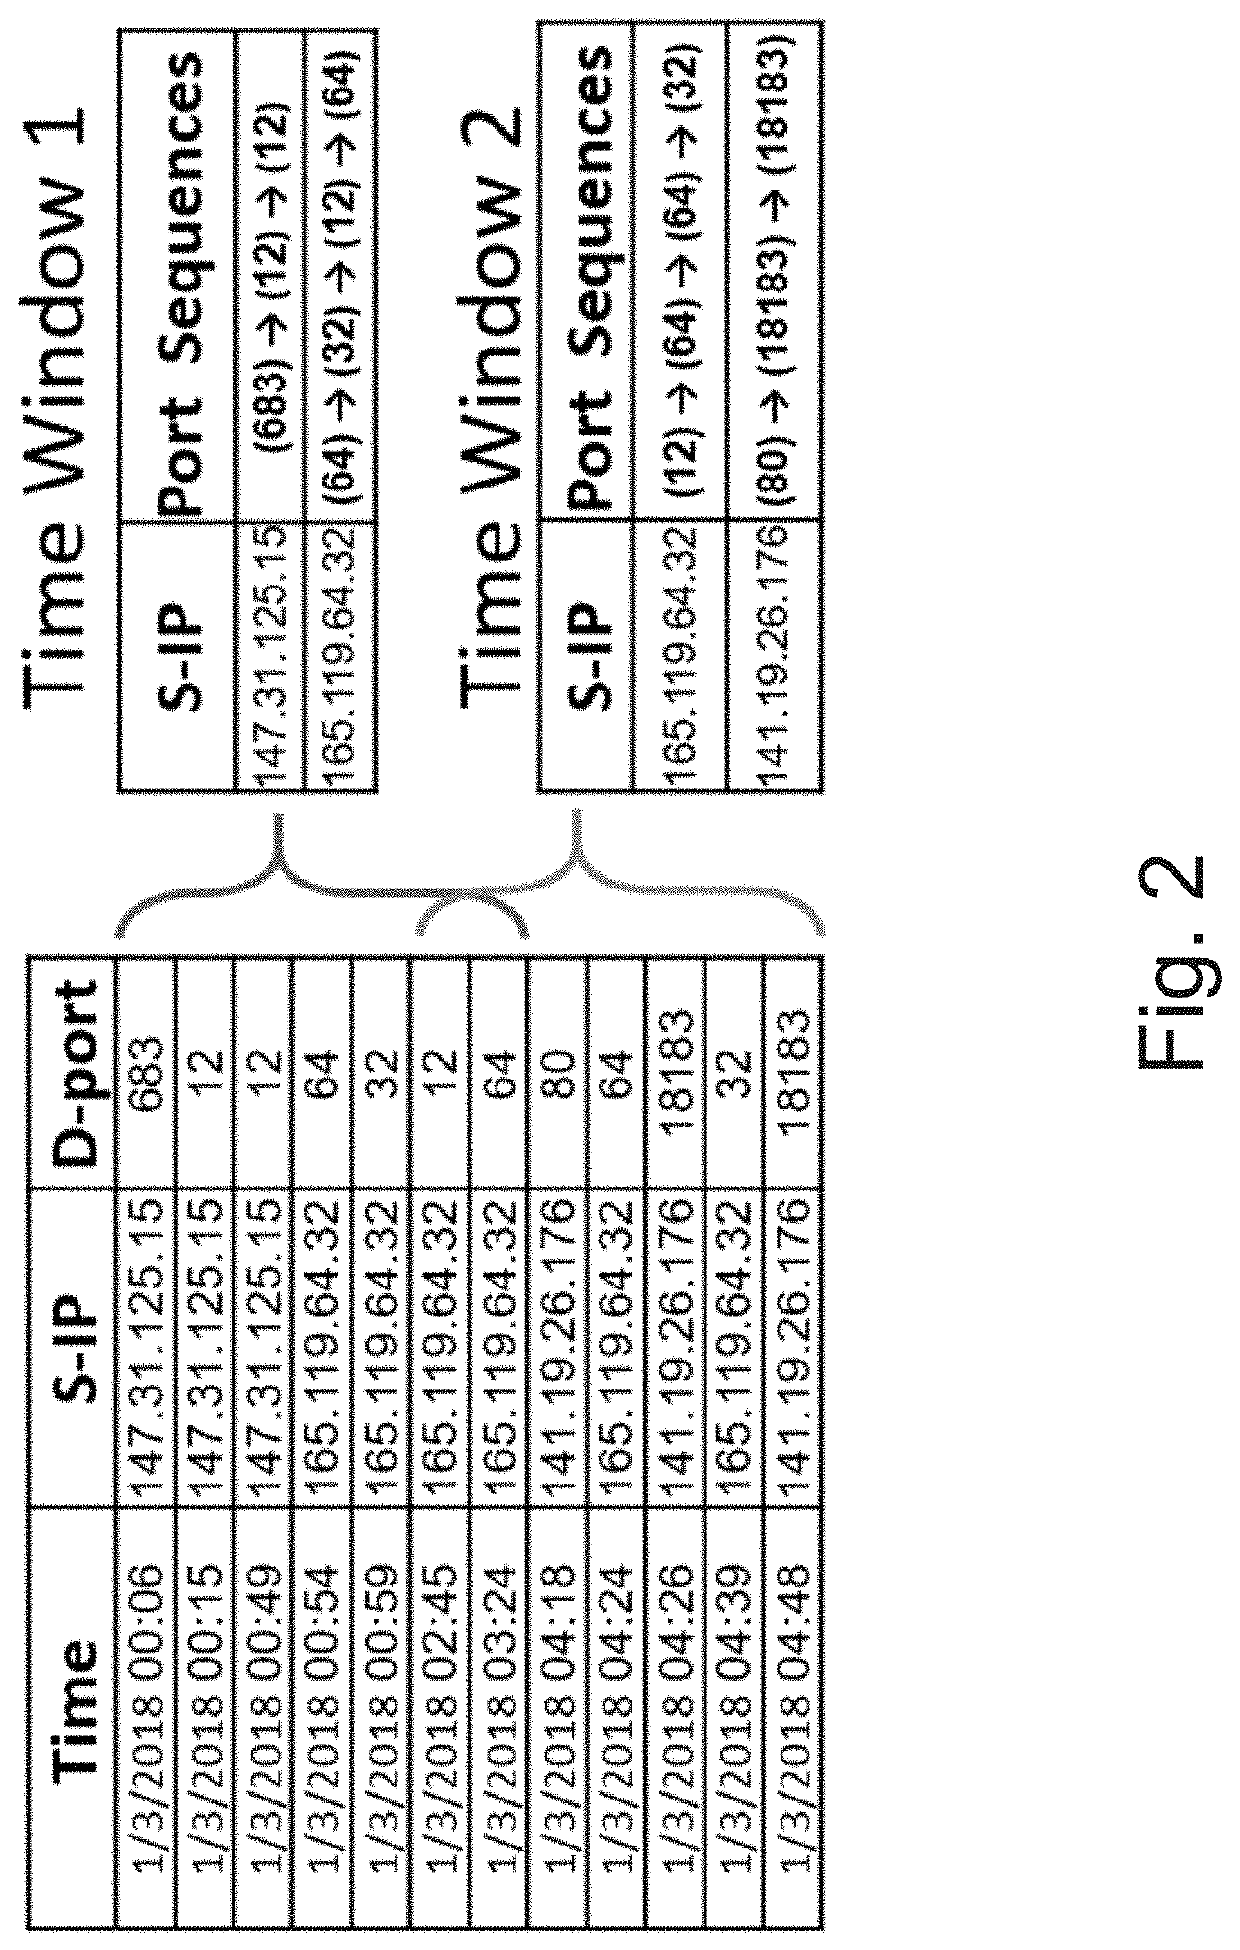 Method and system for clustering darknet traffic streams with word embeddings